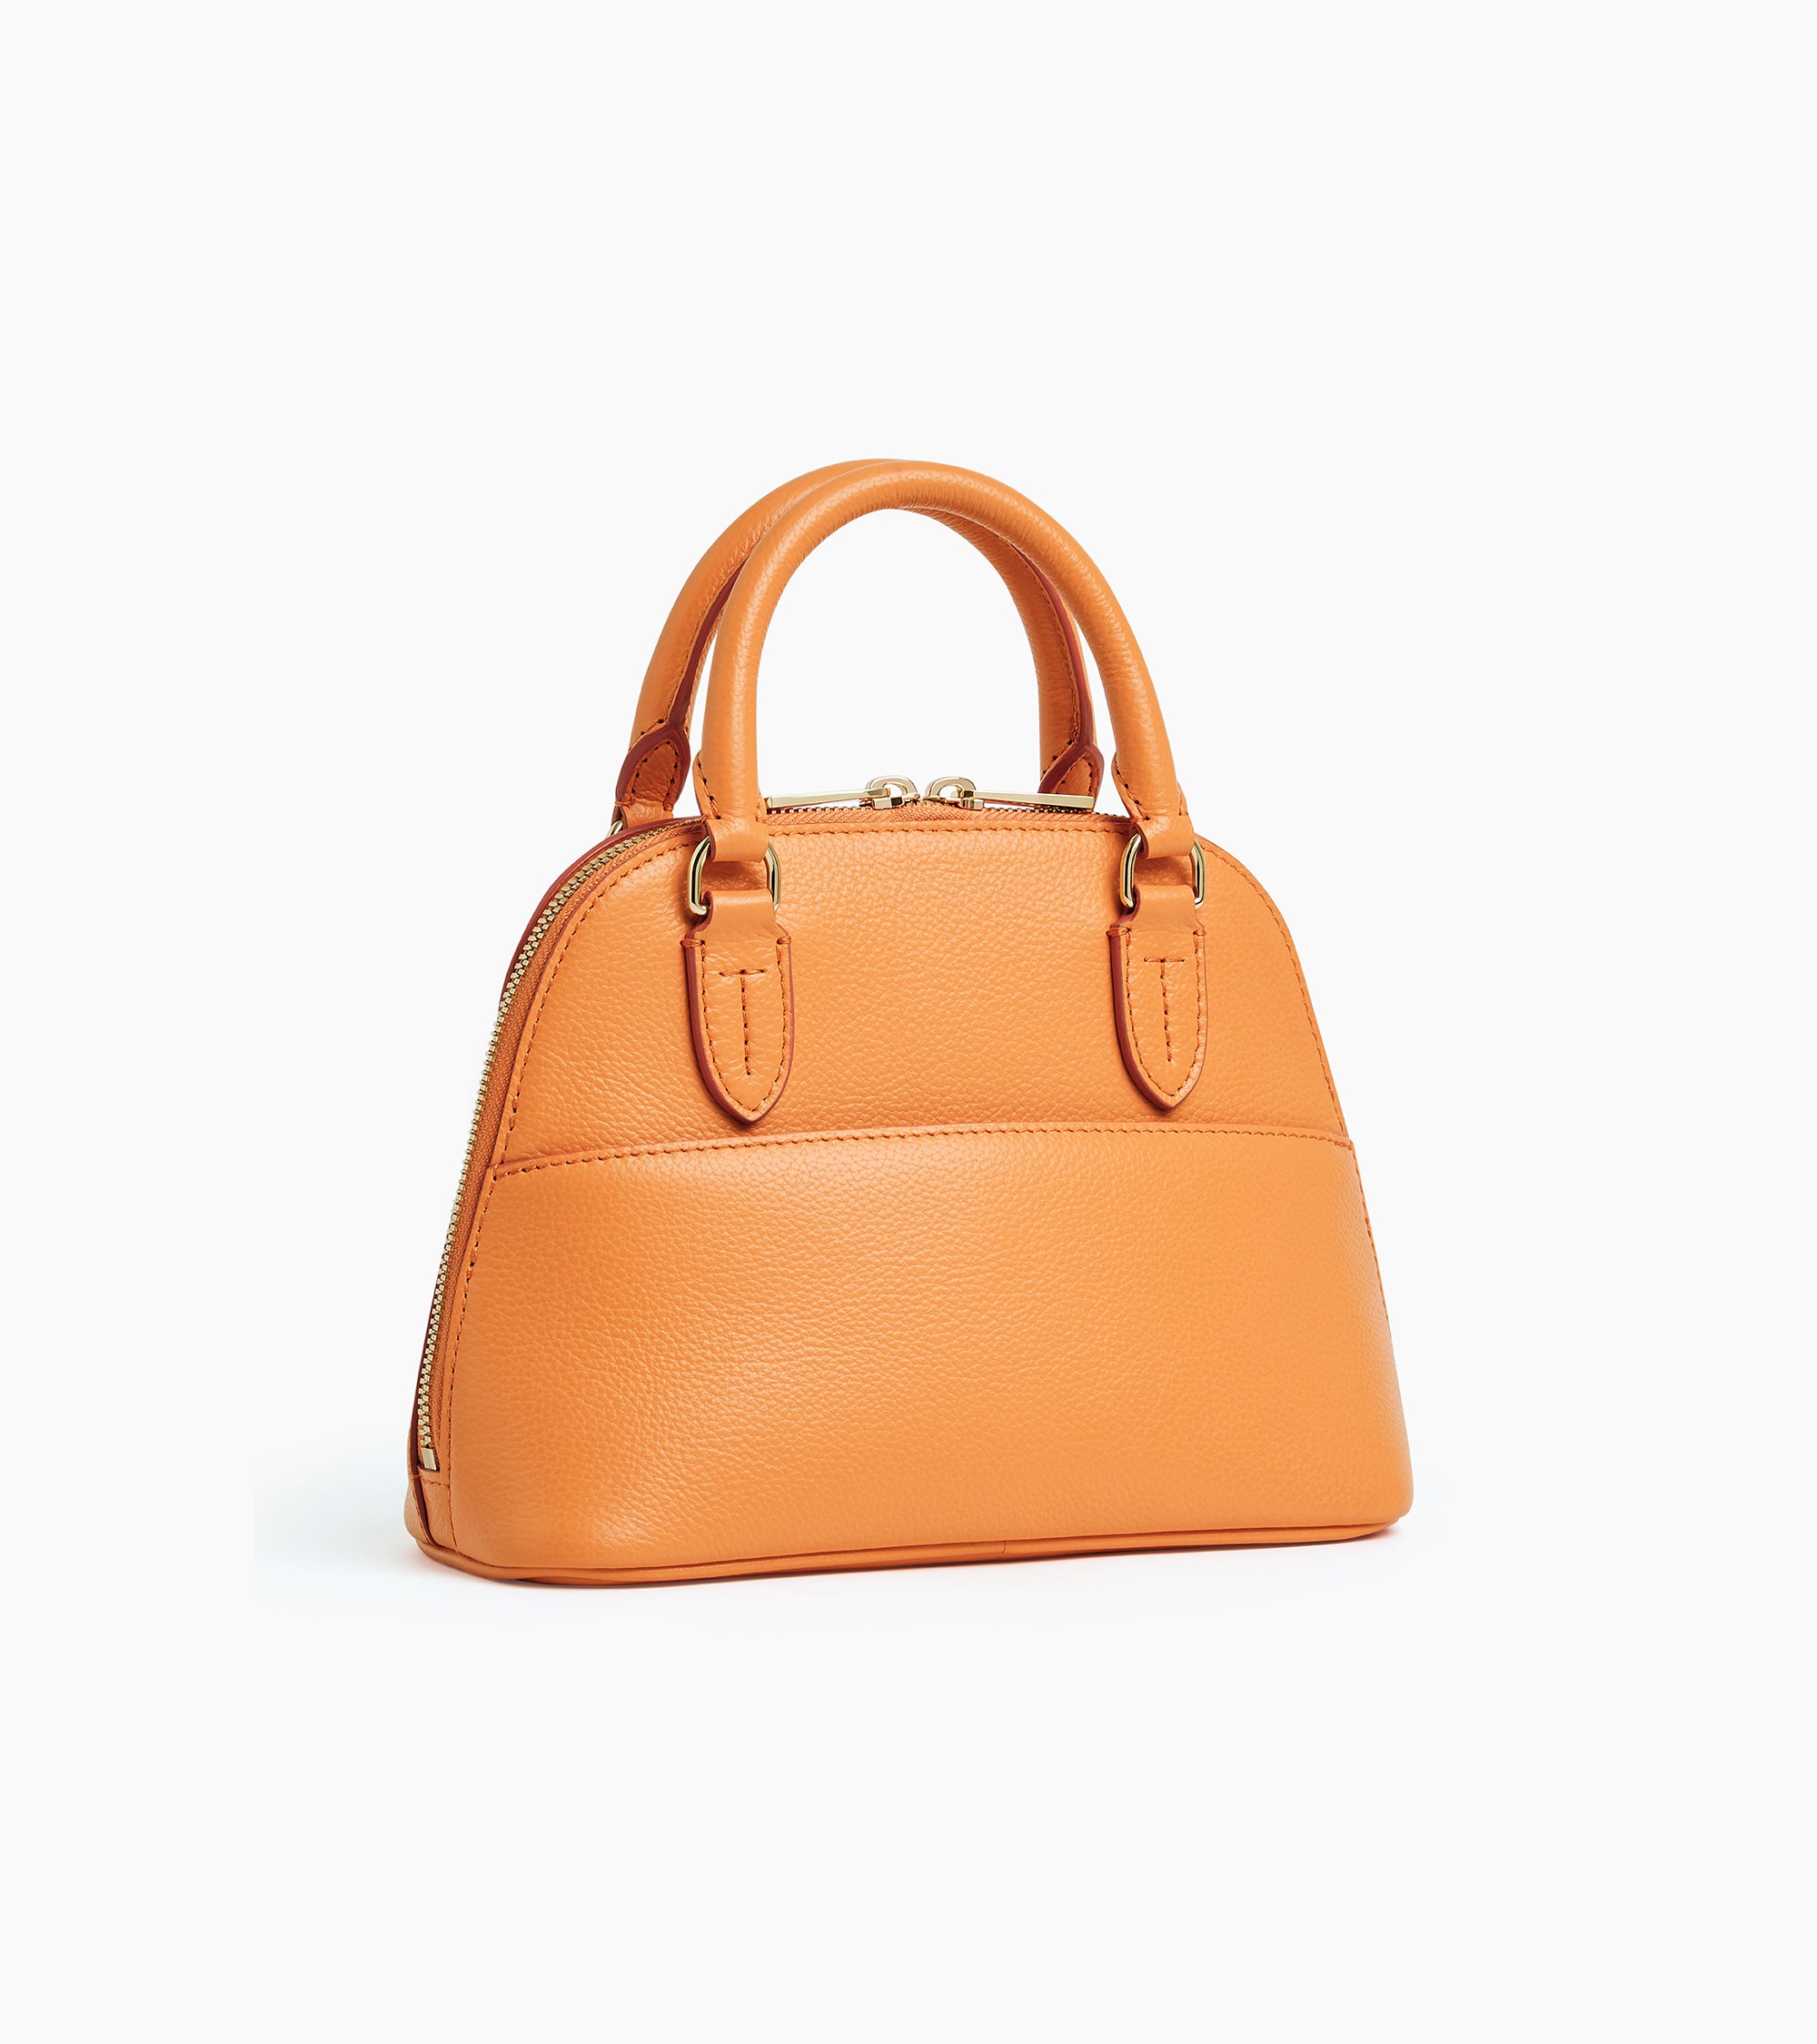 Gisèle small handbag in pebbled leather